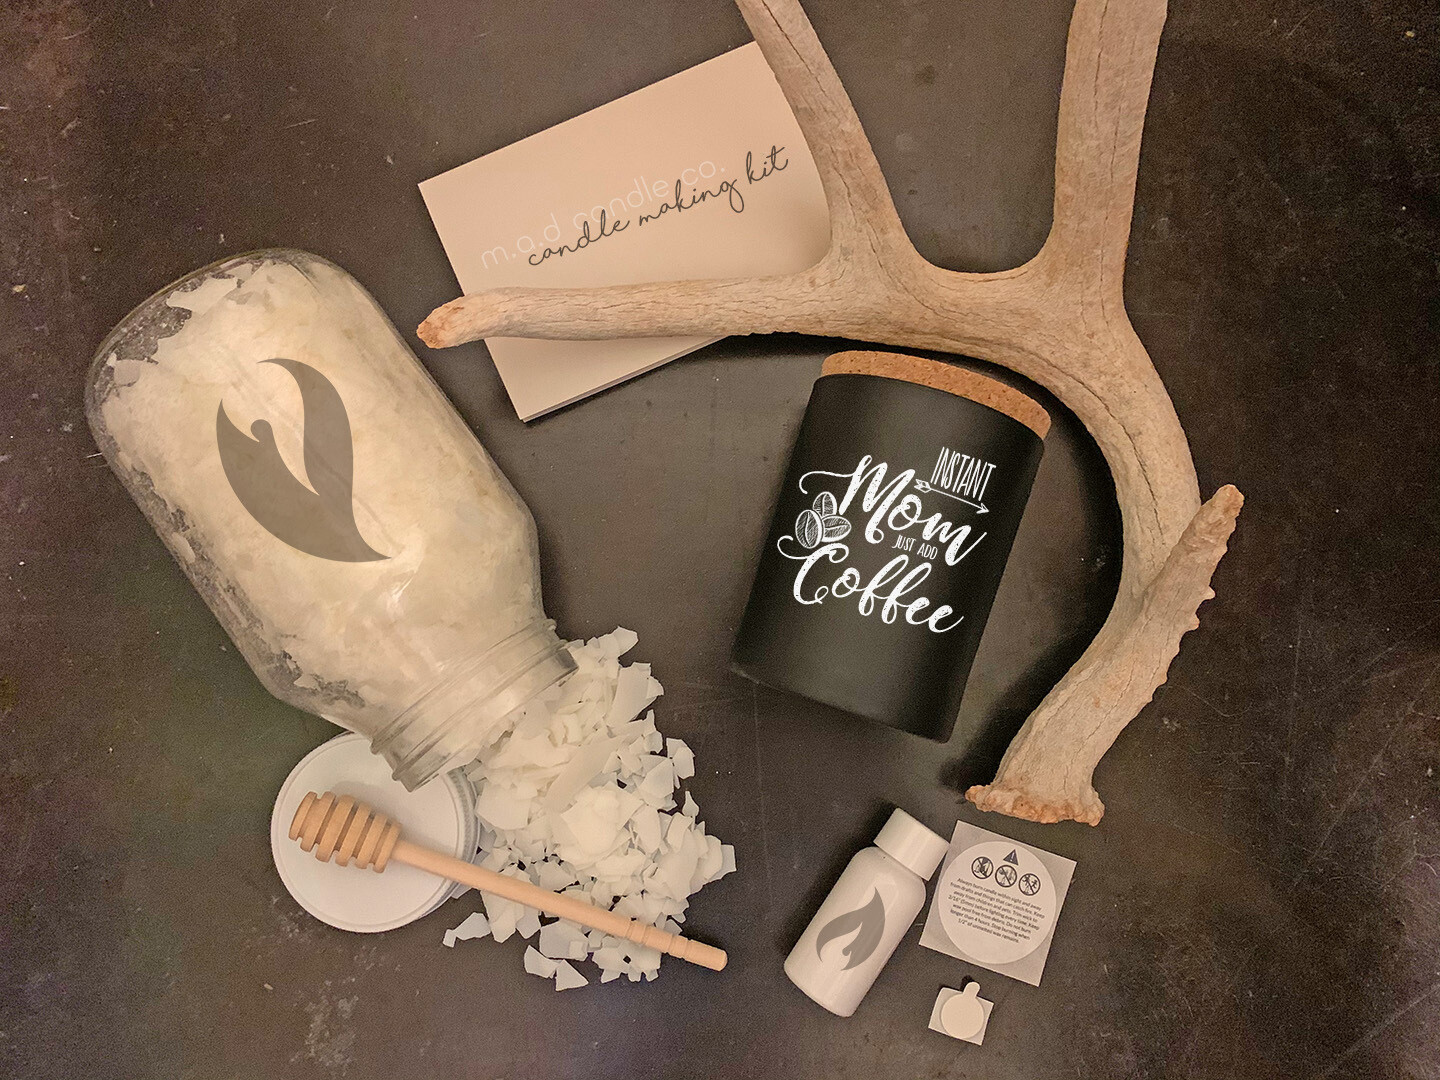 Candle Making Kit for Beginners